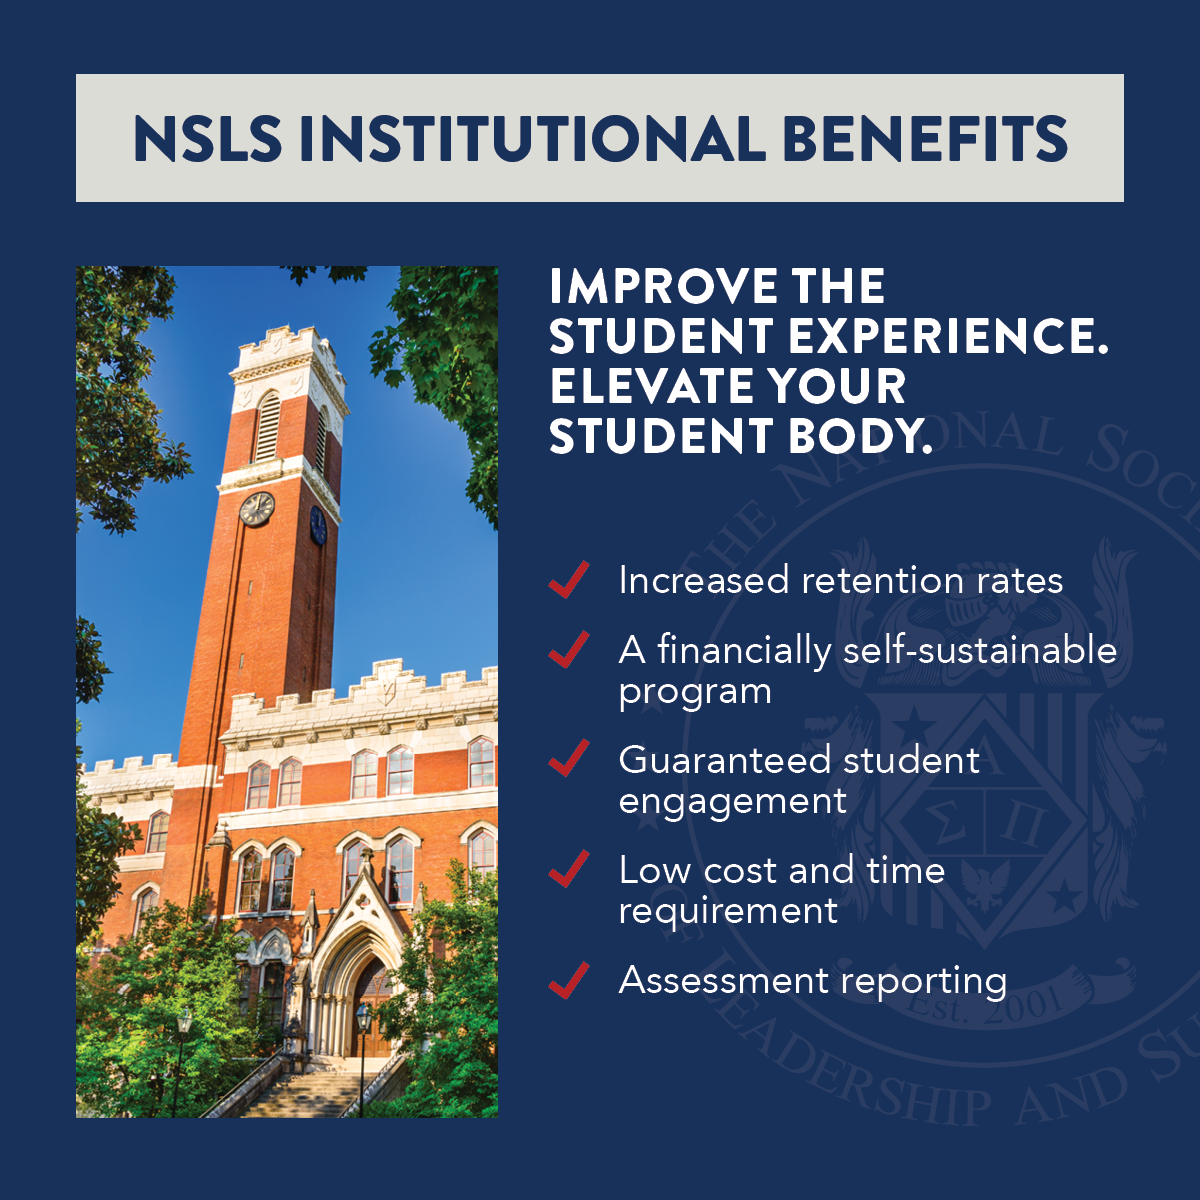 On the left, a school clock tower stretches into a blue sky with green foliage surrounding its cathedral-like doors. On the right is a list of NSLS institutional benefits, which include increased retention rates, a financially self-sustainable program, guaranteed student engagement, low cost and time requirements, and assessment reporting.